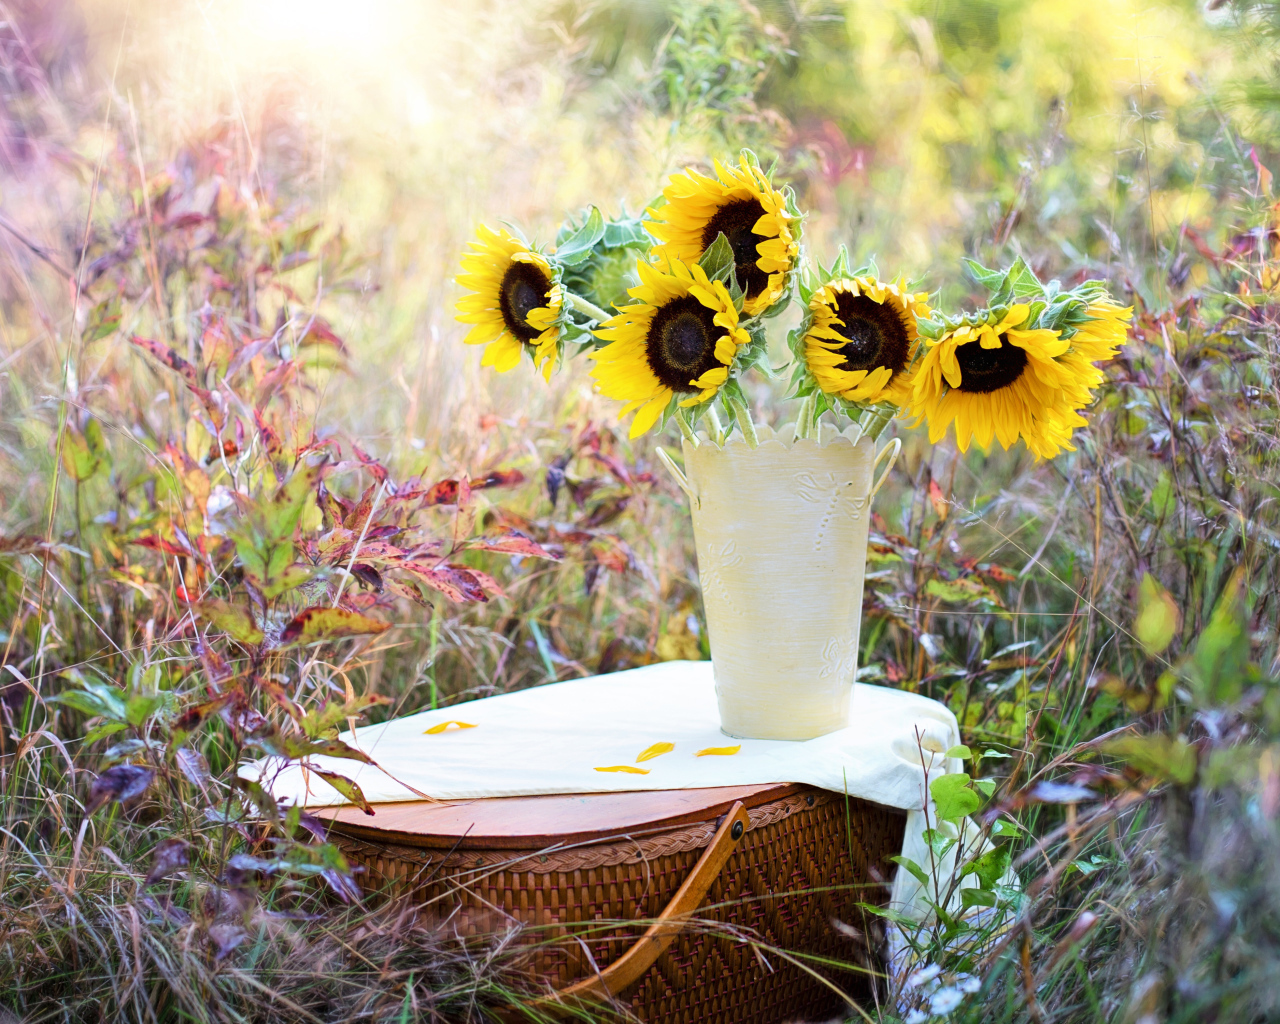 Yellow flowers of a sunflower in a vase stand on a basket